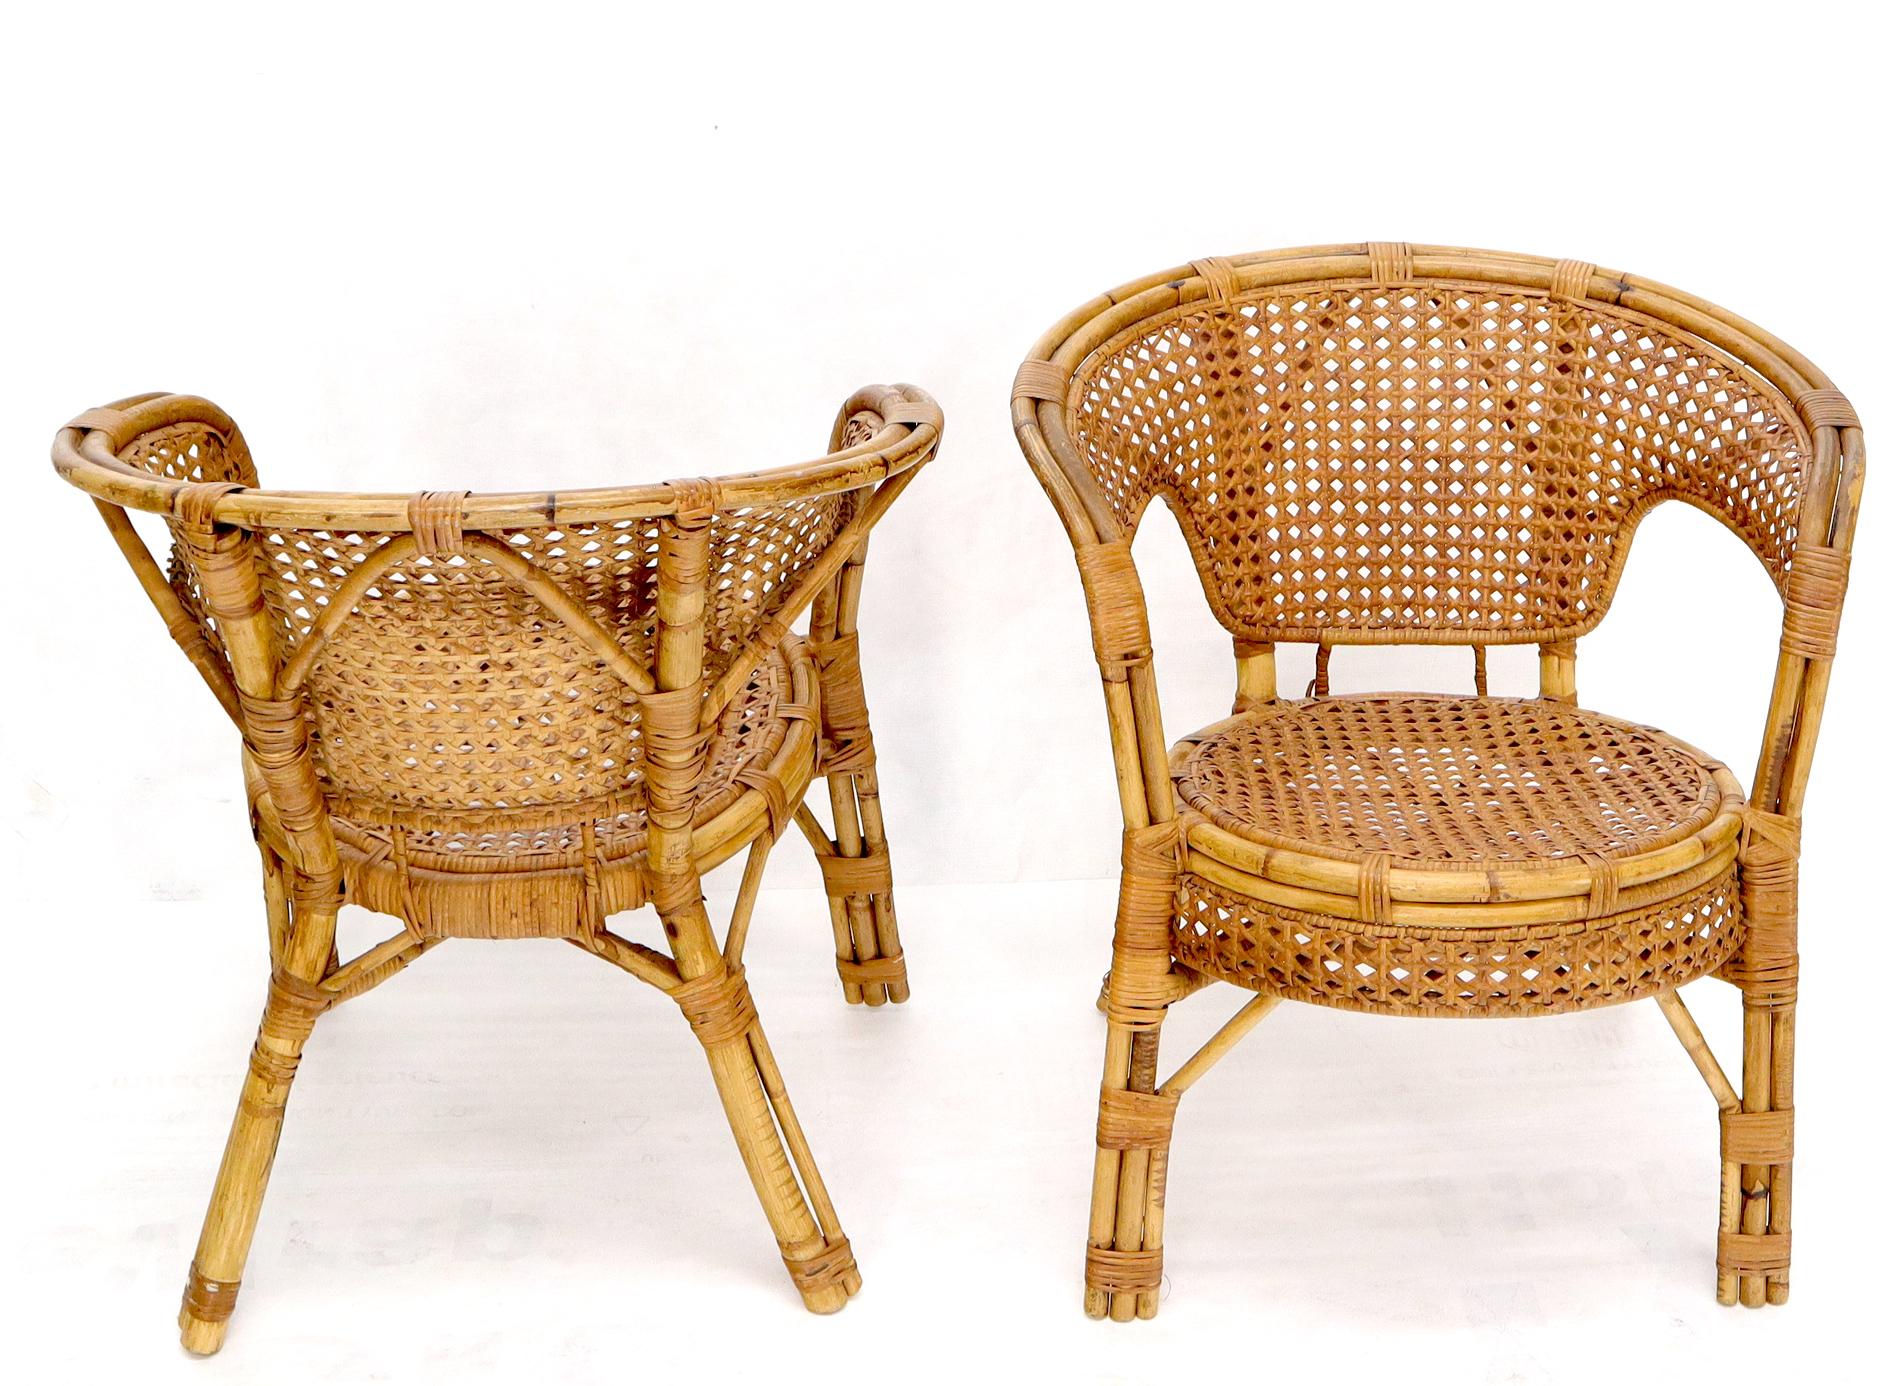 Pair of Stunning Round Barrel Shape Bamboo Rattan Cane Seat Chairs In Good Condition For Sale In Rockaway, NJ